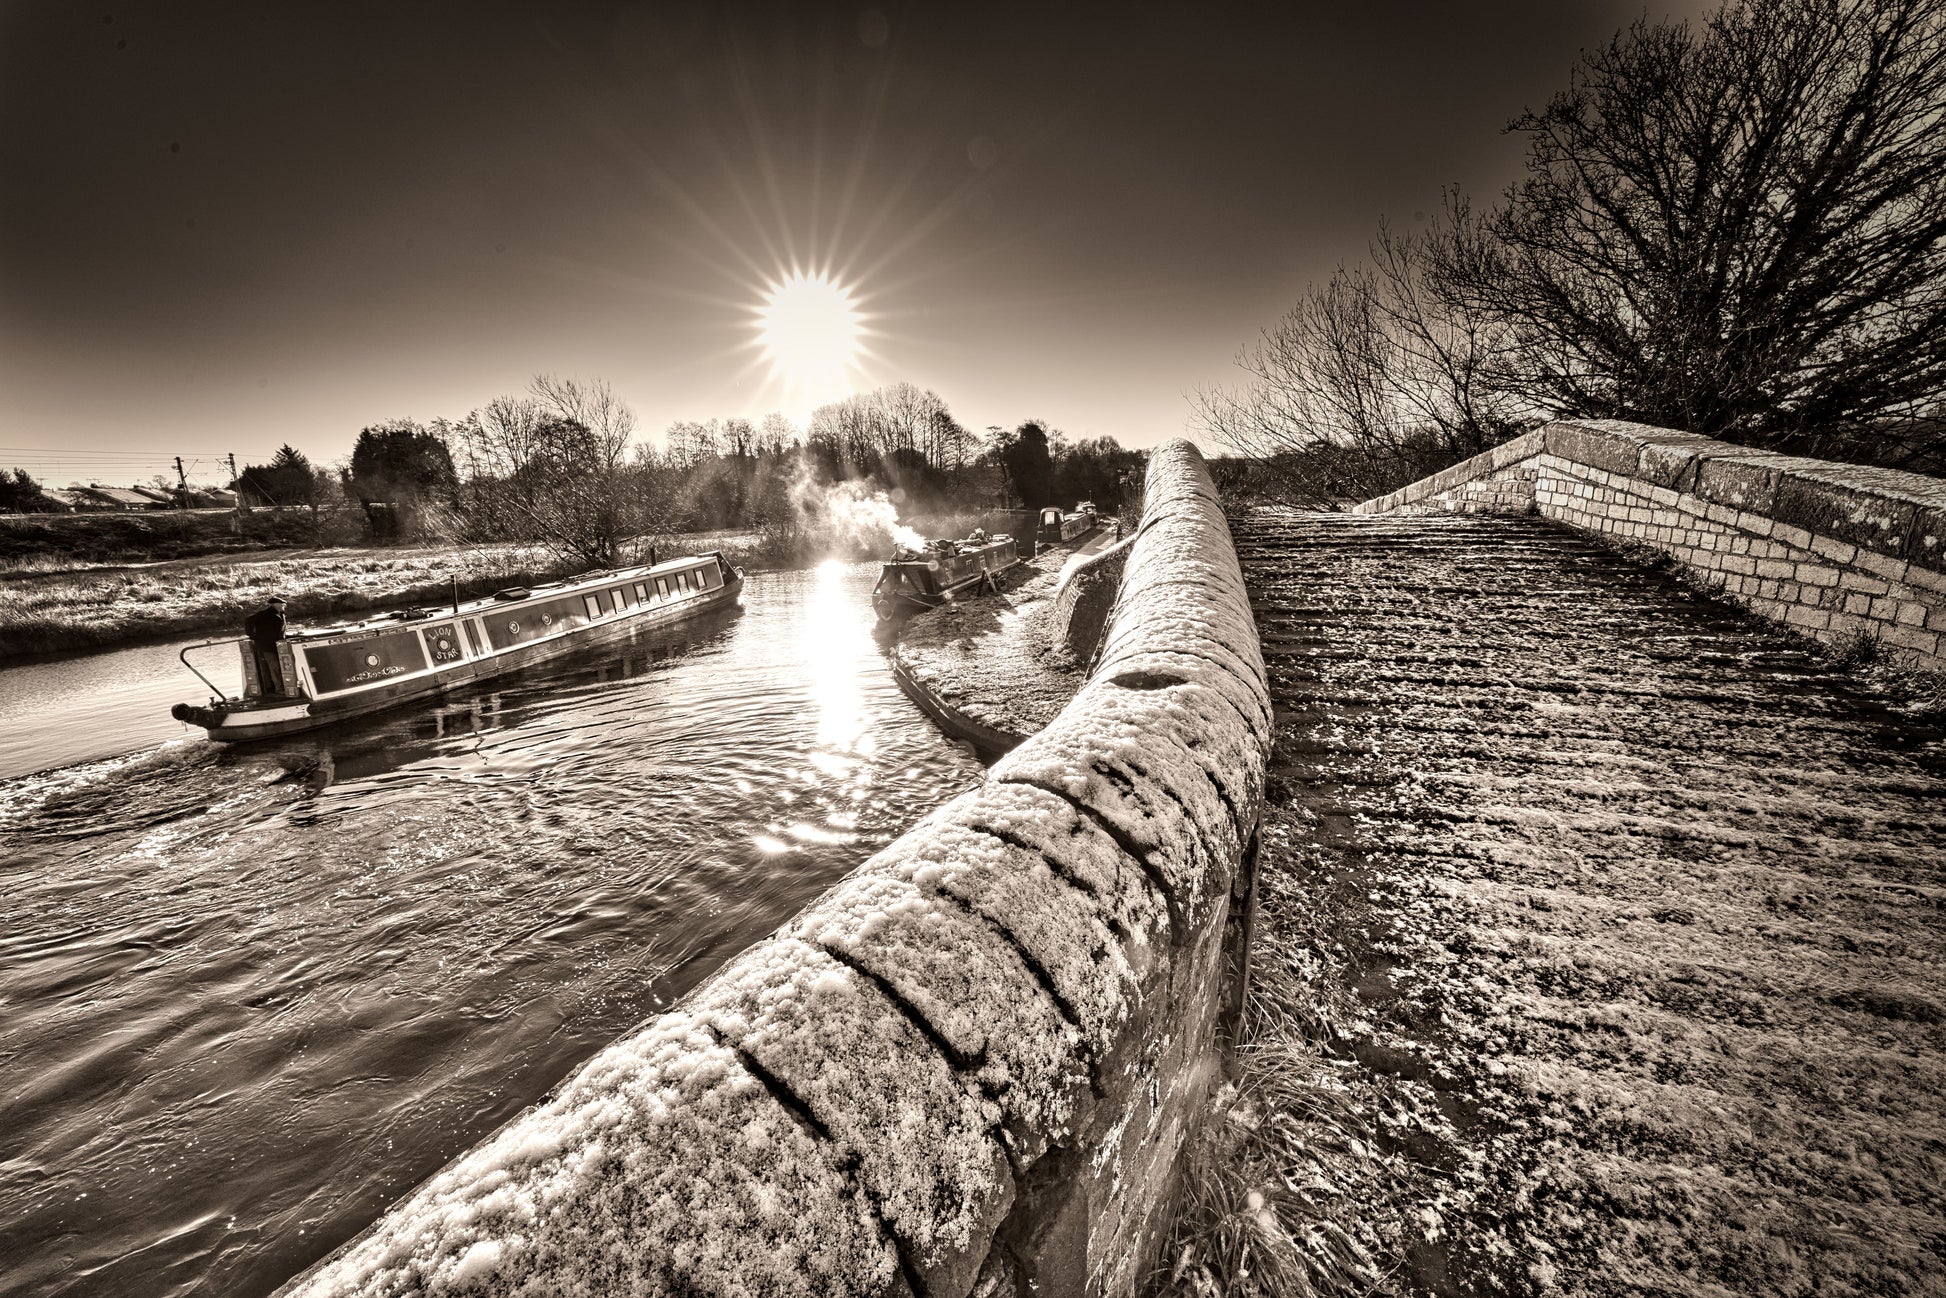 Great Haywood Canal in Sepia 4 - DSC04134 - Photo - Photographer Martin Fisher